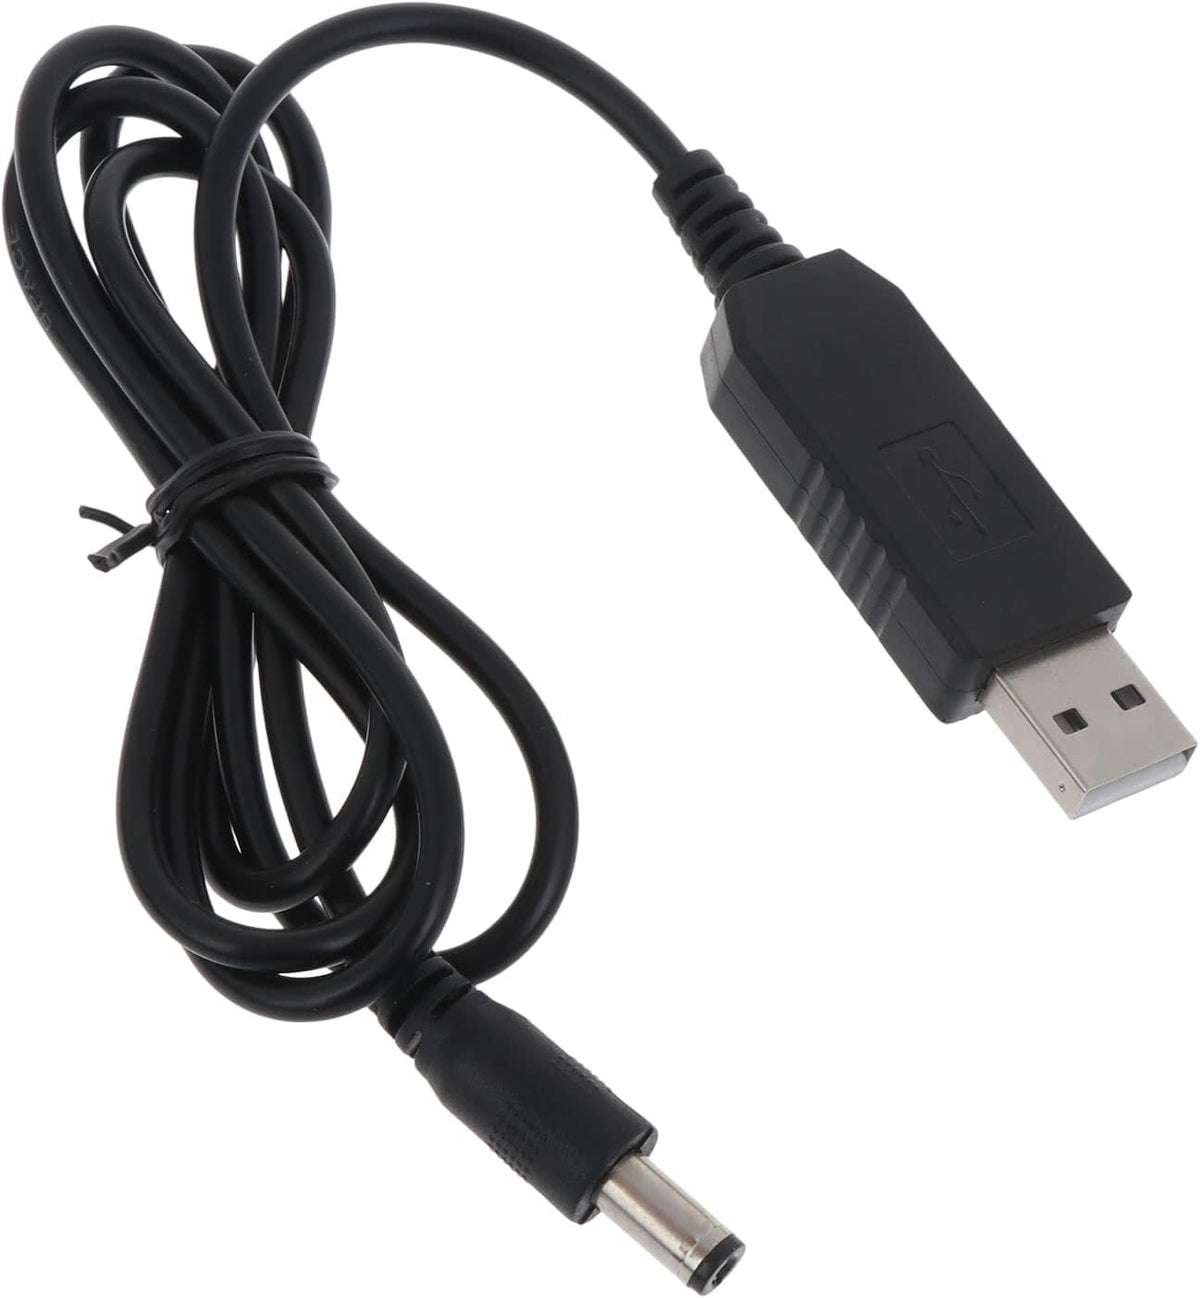 USB to DC Convert Cable 5V to 12V Voltage Step-Up Cable - Nomel Power Supply USB Cable with DC Jack 5.5 x 2.1mm, USB 5V to DC 12V Connect Cable